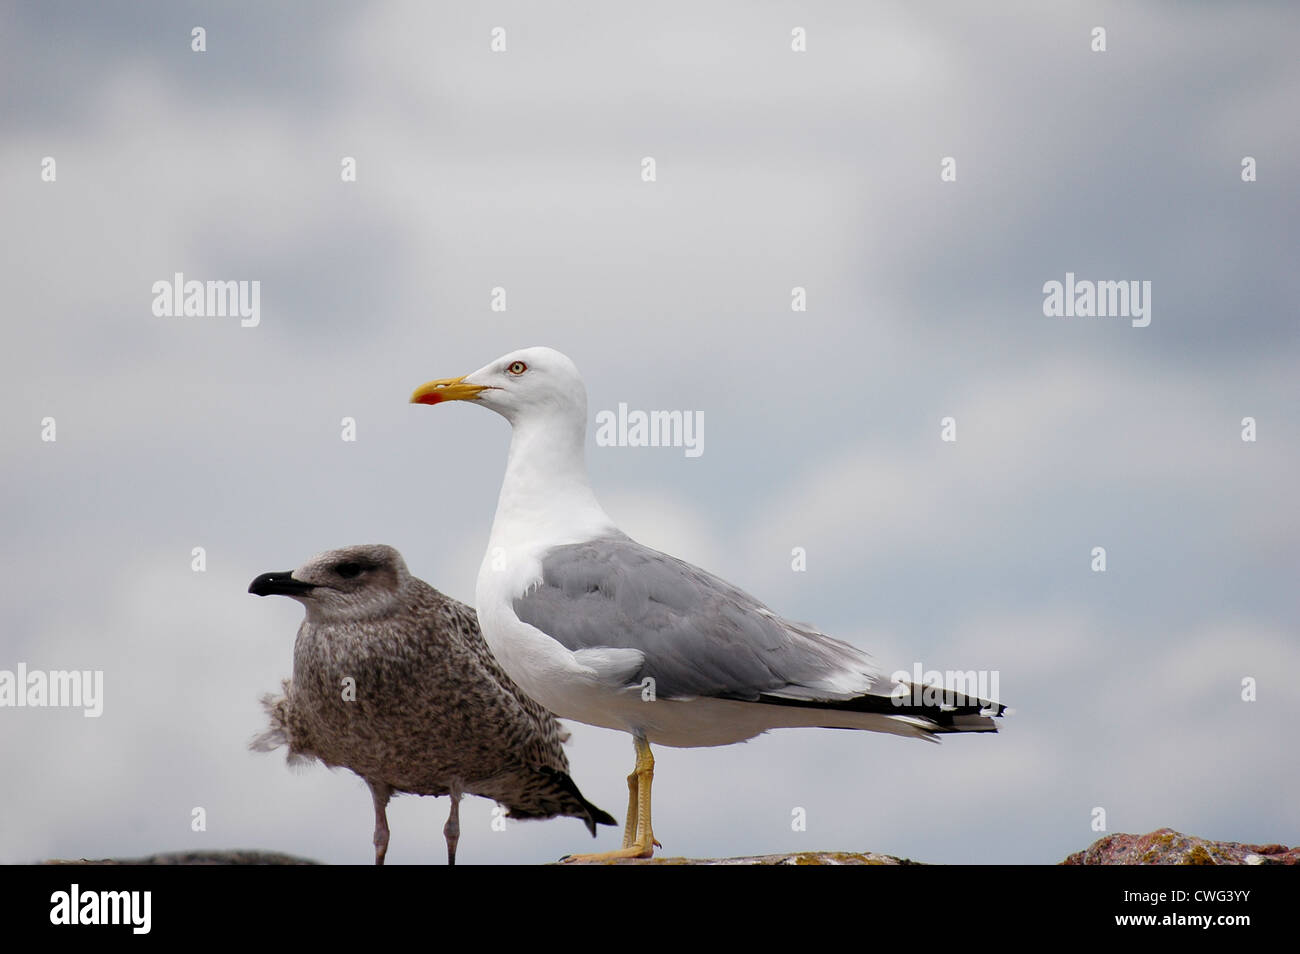 young seagull (Larus Ridibundus) with adult standing on rocks at seaside Stock Photo